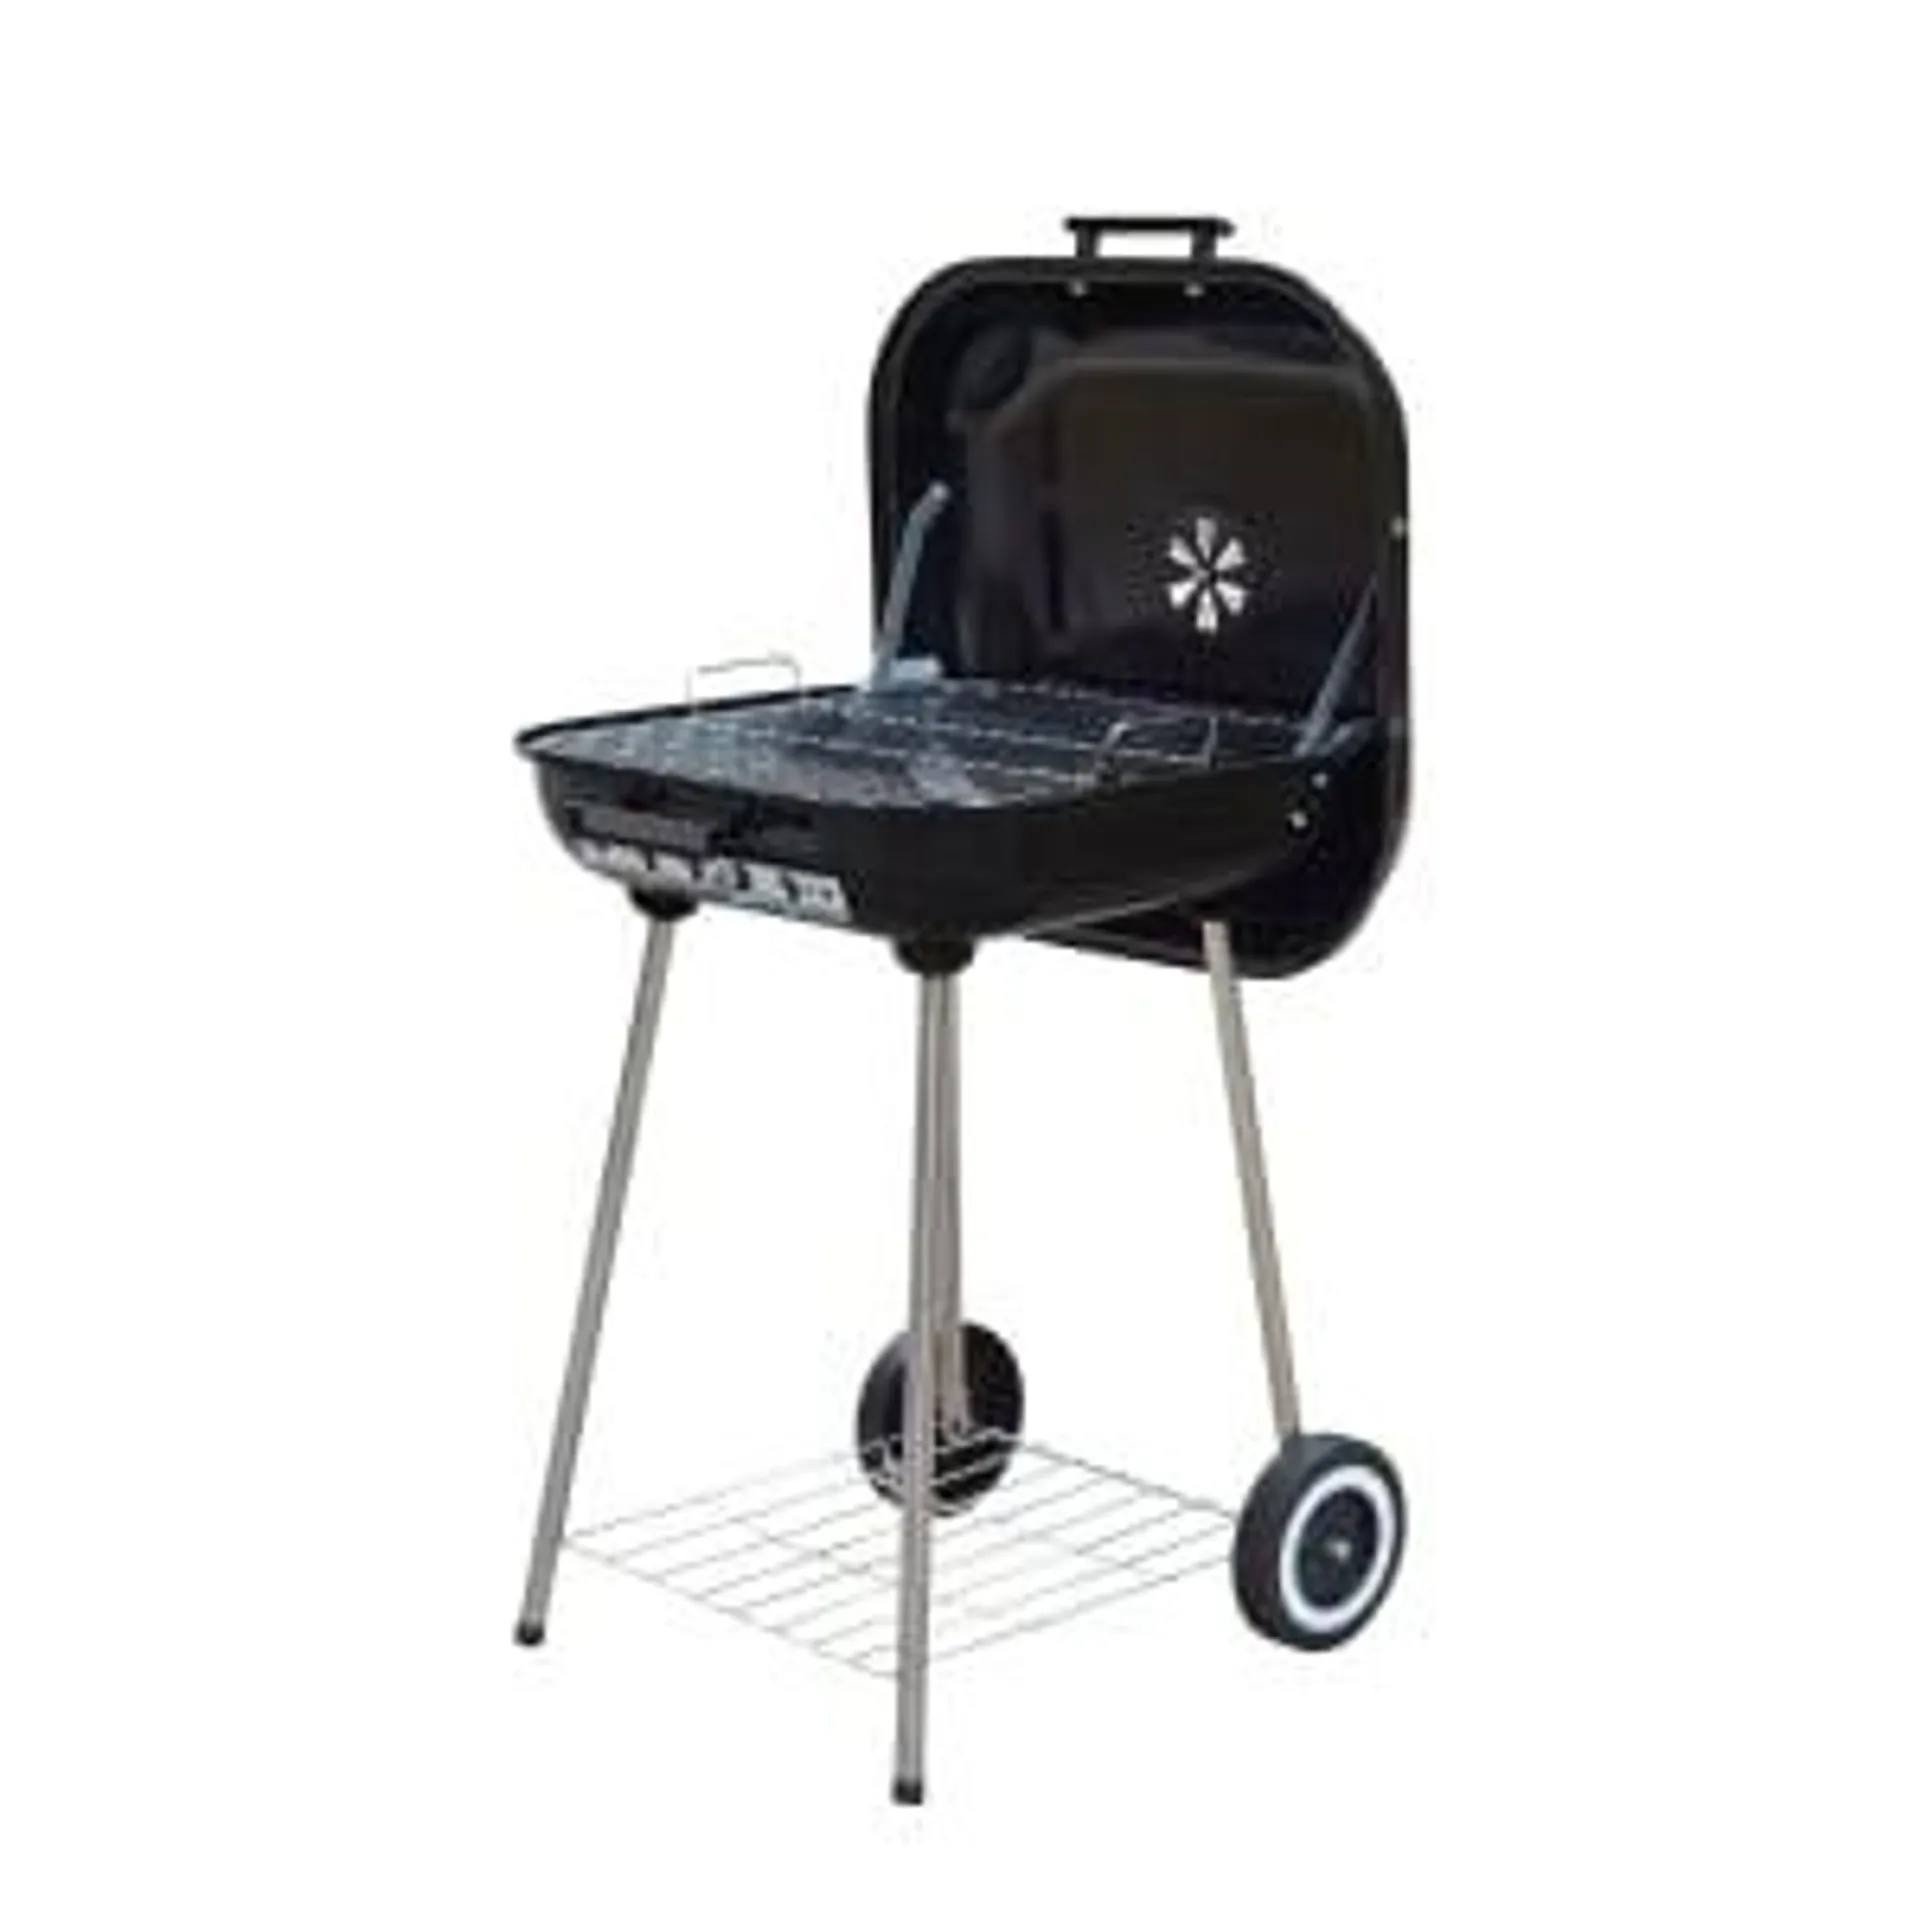 Family Chef Black Charcoal Grill, 18.5 in.